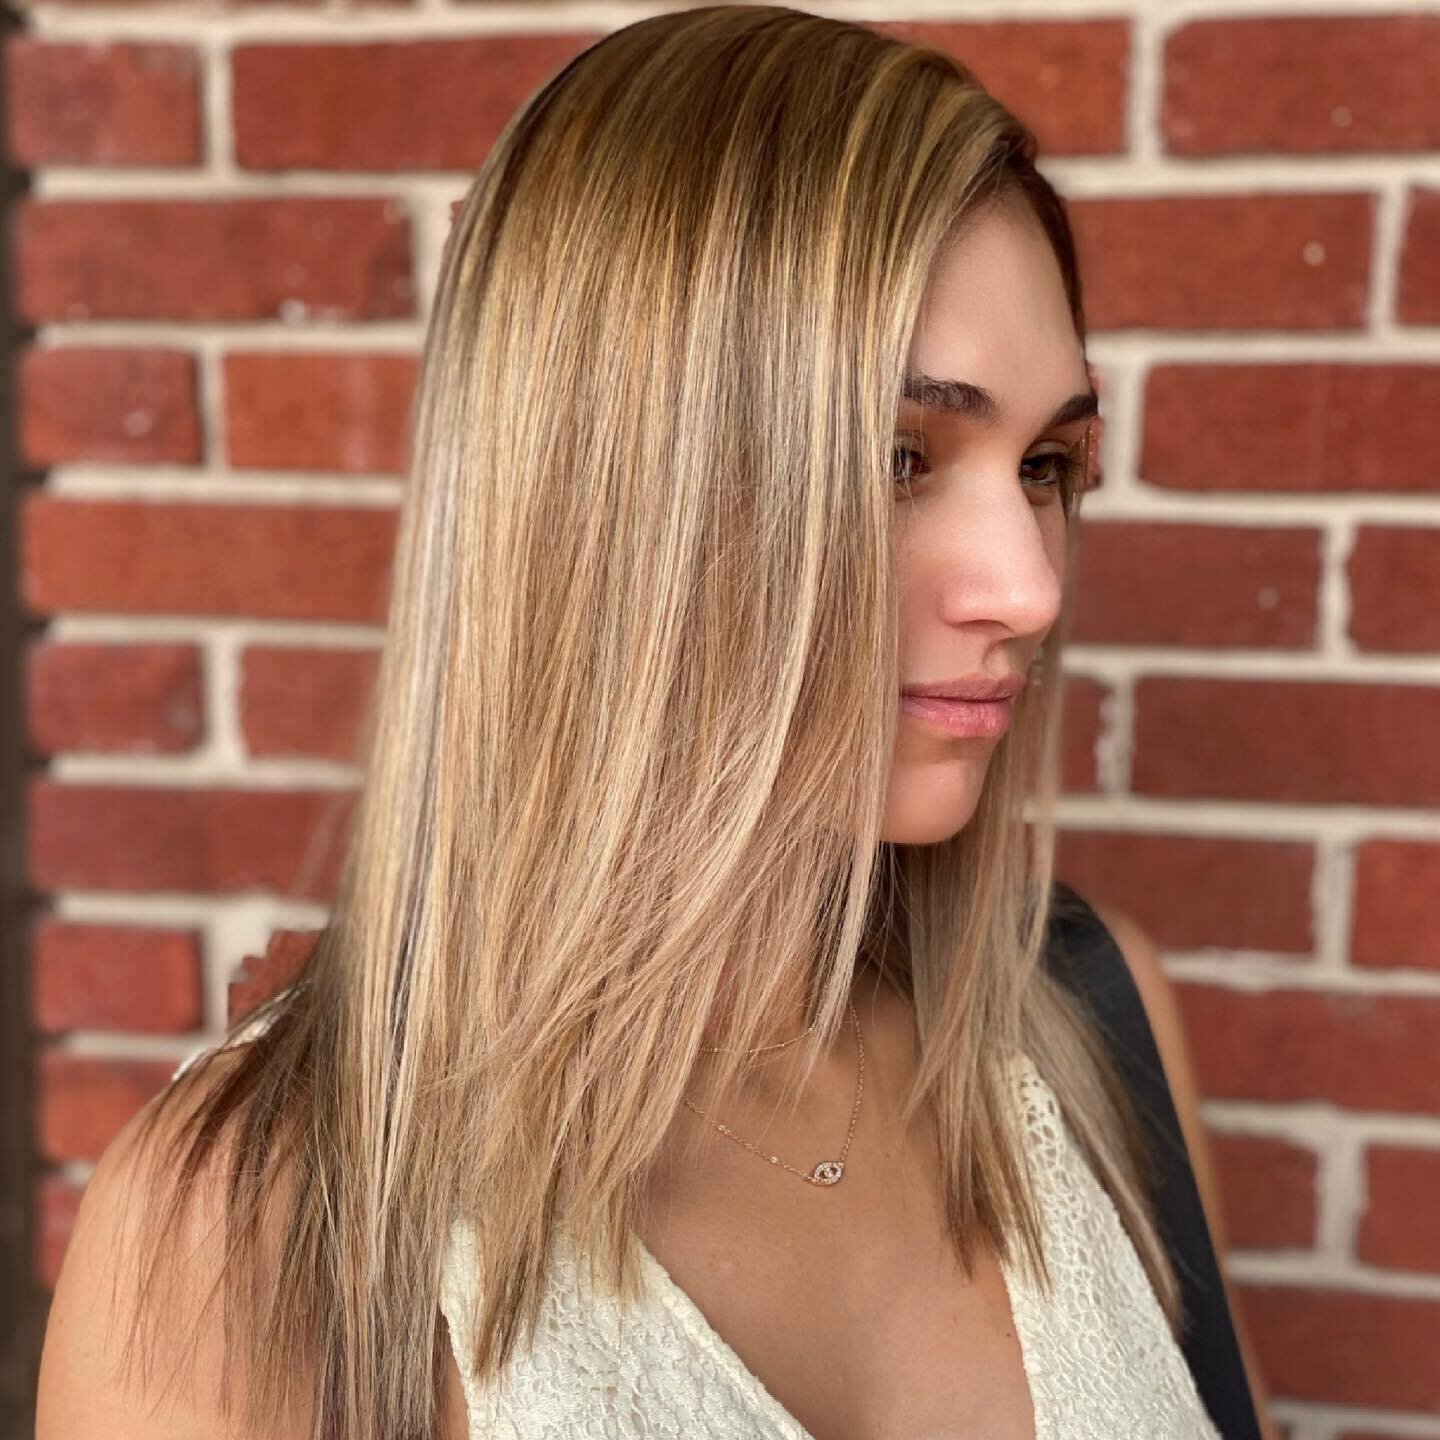 ✨Lightening Transition ✨ 
If you plan to go lighter it may take several sessions to reach your goal. Patience is 🔑. Things to consider when choosing your &ldquo;Inspo&rdquo;  hair color include a budget, maintenance (salon visits) &amp; quality hair